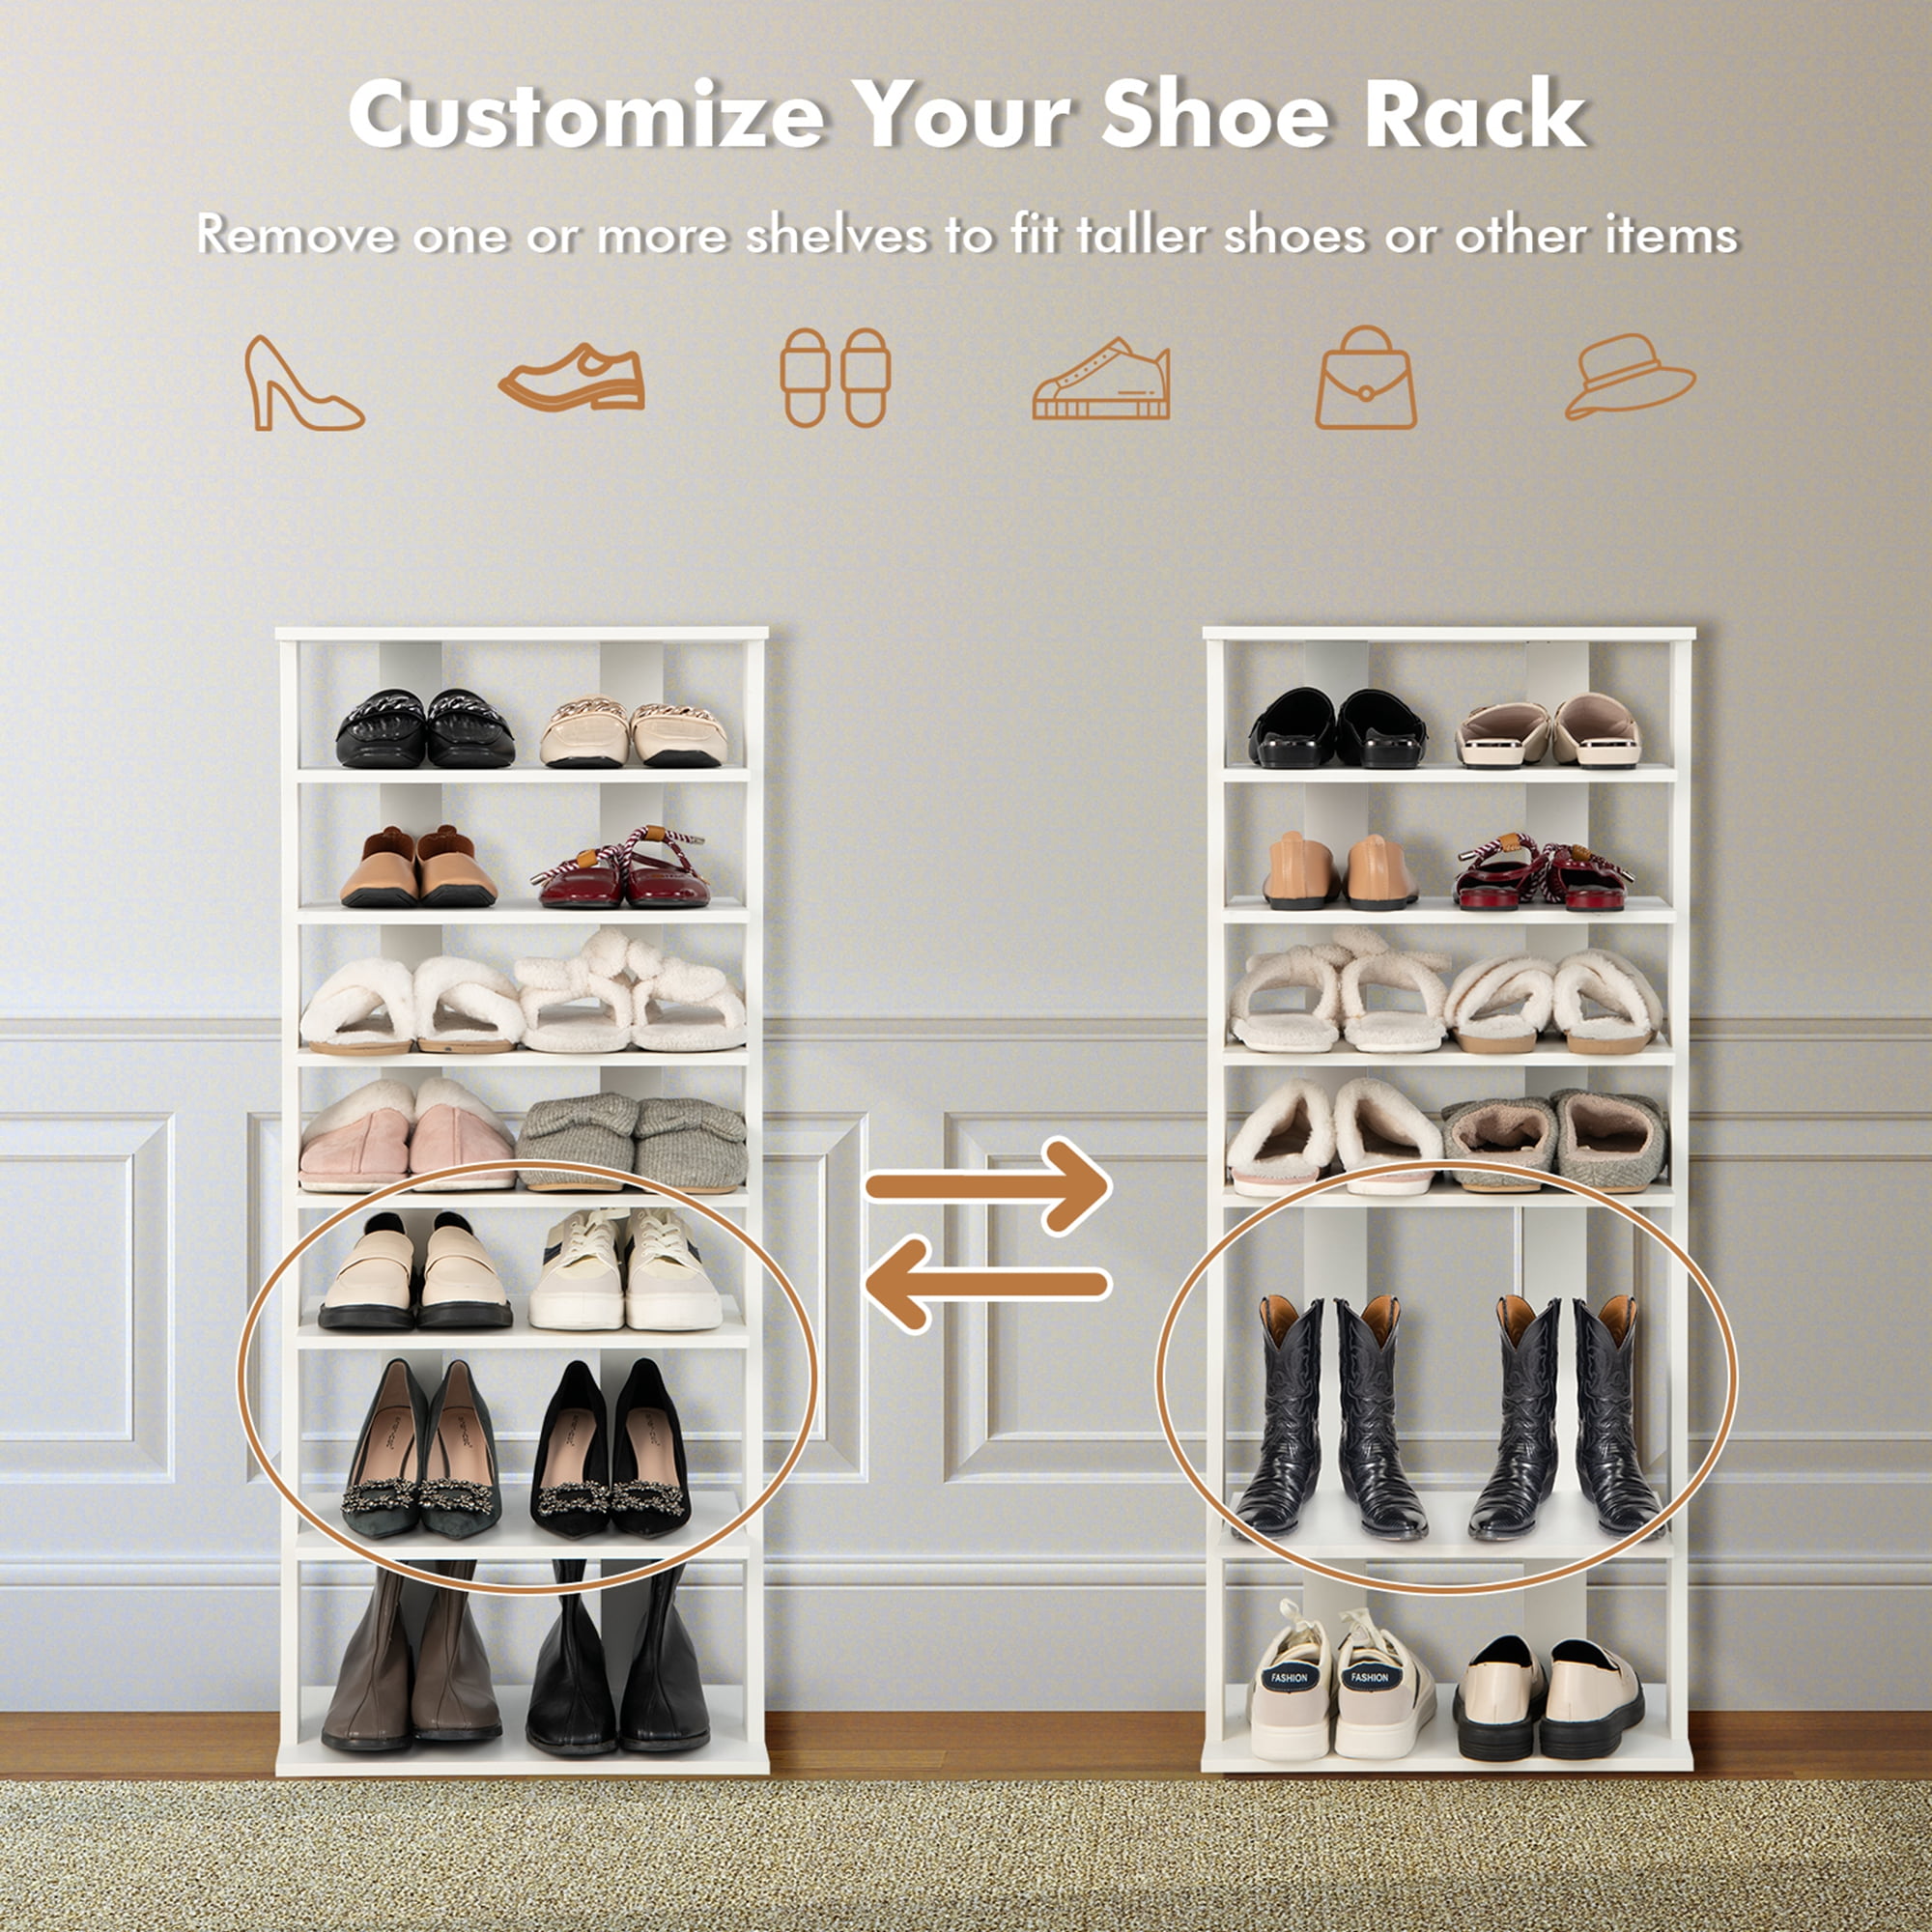 Gymax Patented 7-Tier Double Shoe Rack Free Standing Shelf Storage